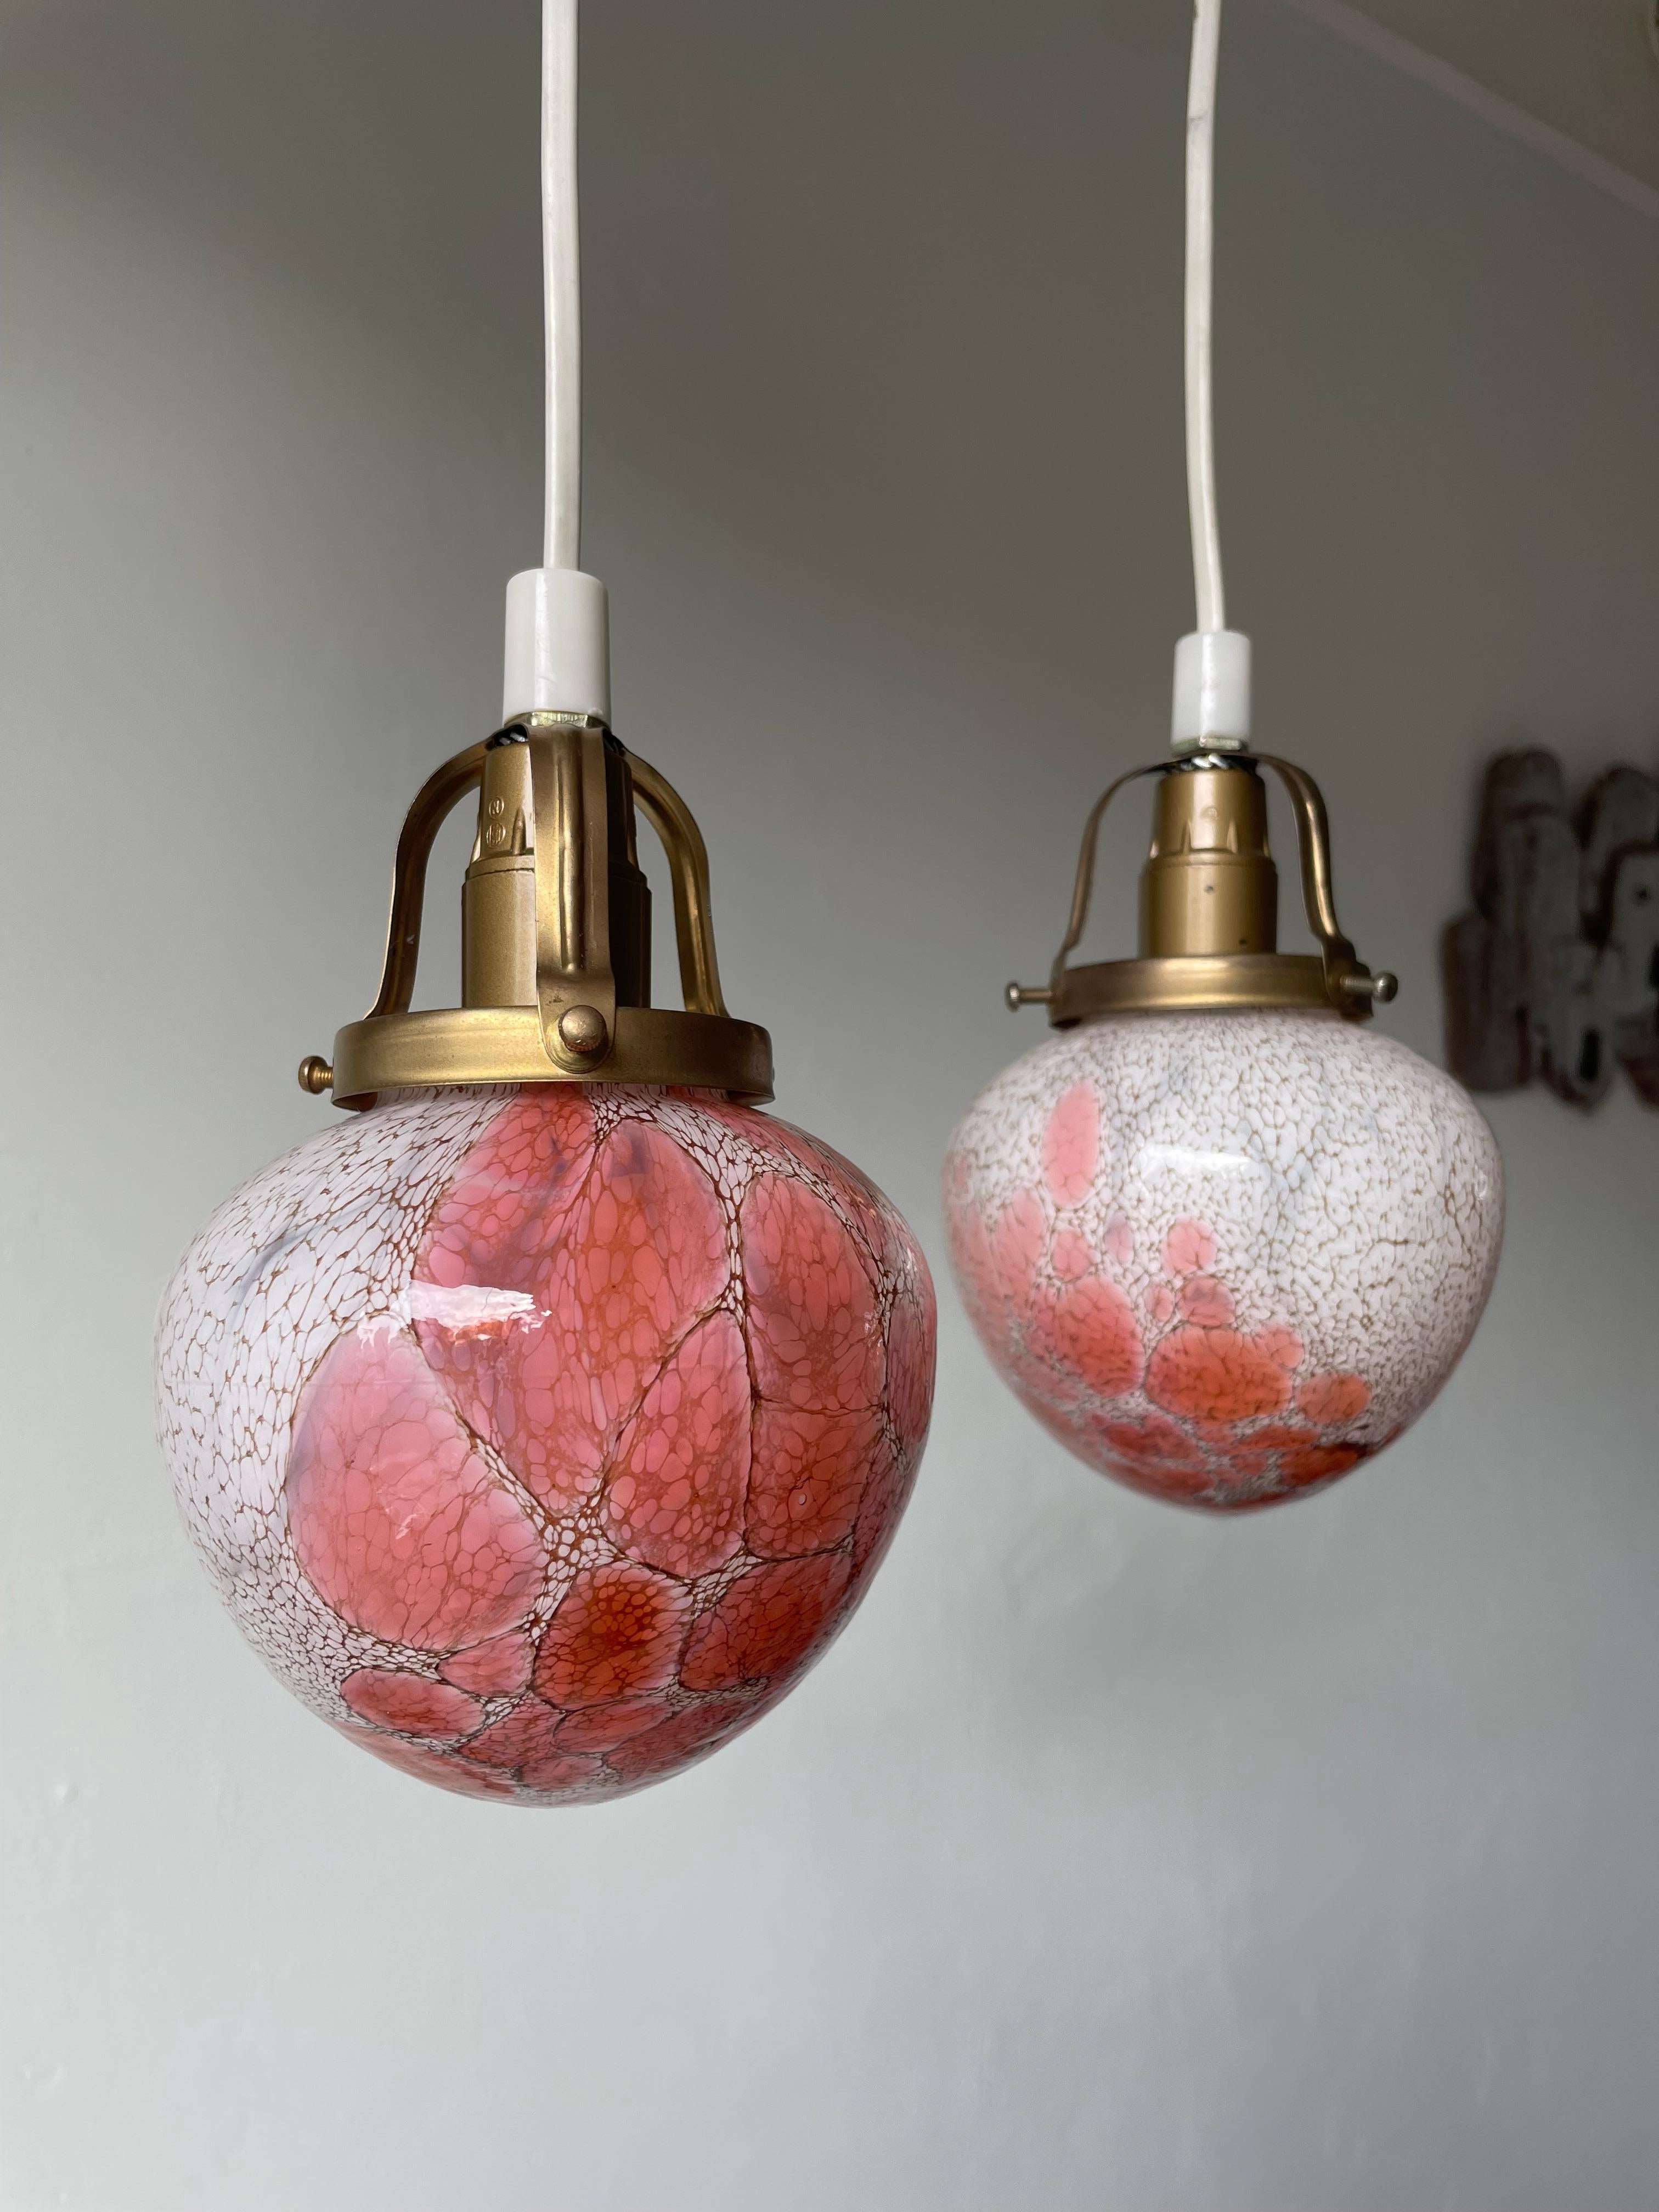 Two striking Scandinavian Modern art glass pendants on brass mounts manufactured by Pukeberg Glassworks in Sweden in the mid 20th century. Cloudy white, rose, pink and peach colors in organic bubble patterns. Small original label on each glass